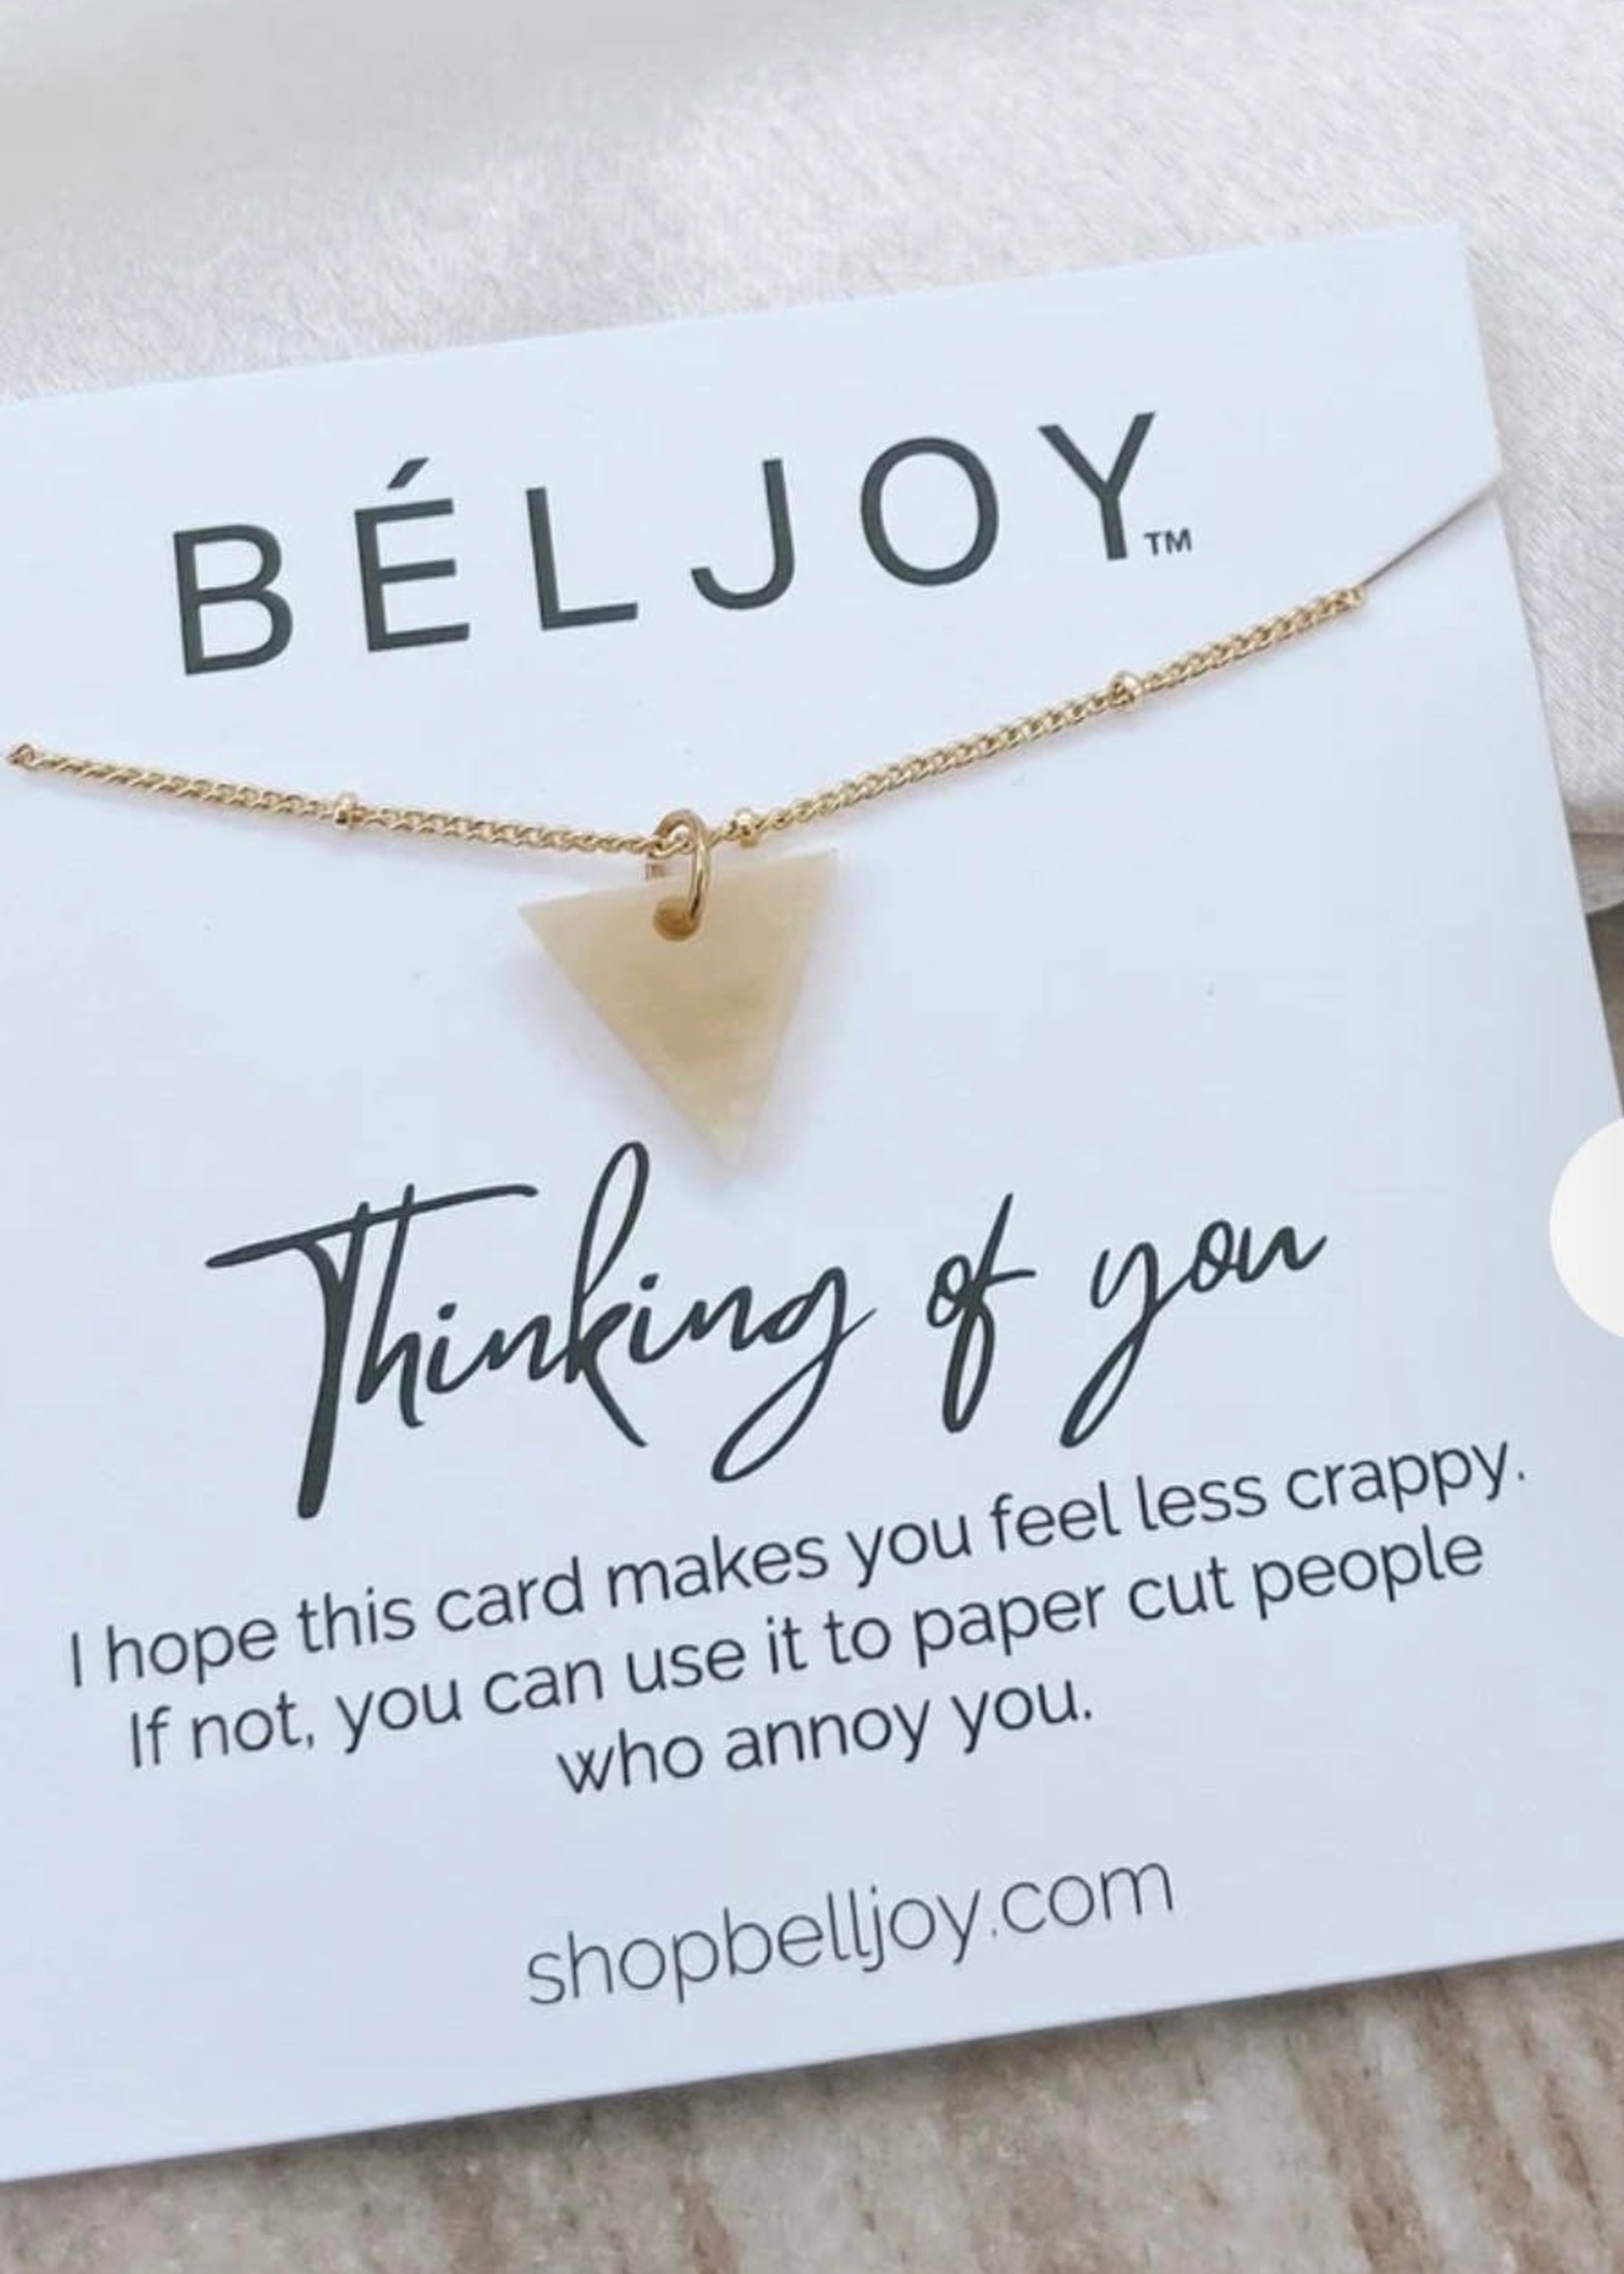 Beljoy Gift Collection - Several Options!